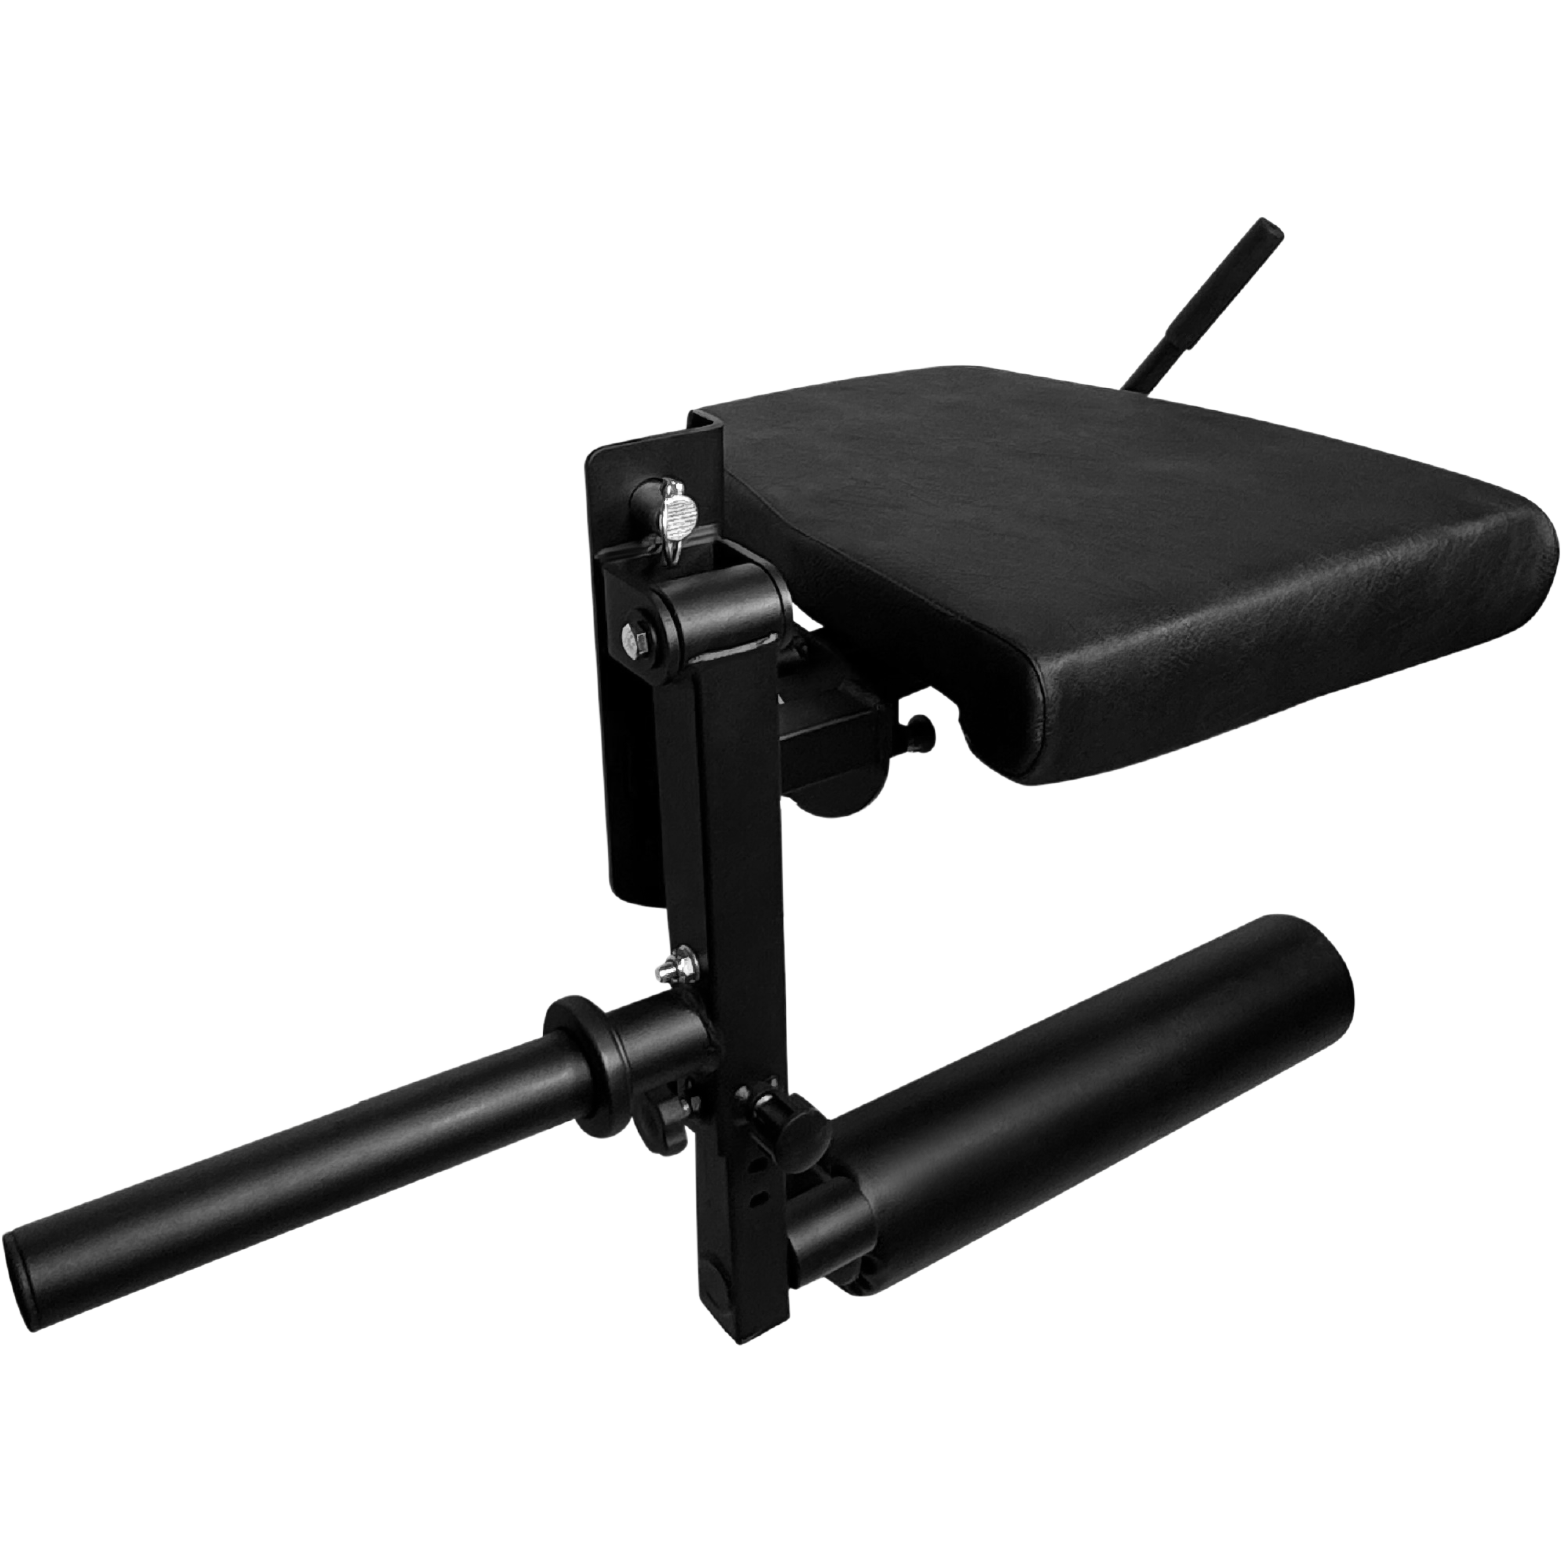 Black Delta Fitness Plate-Loaded Leg Curl and Extension Rack Attachment